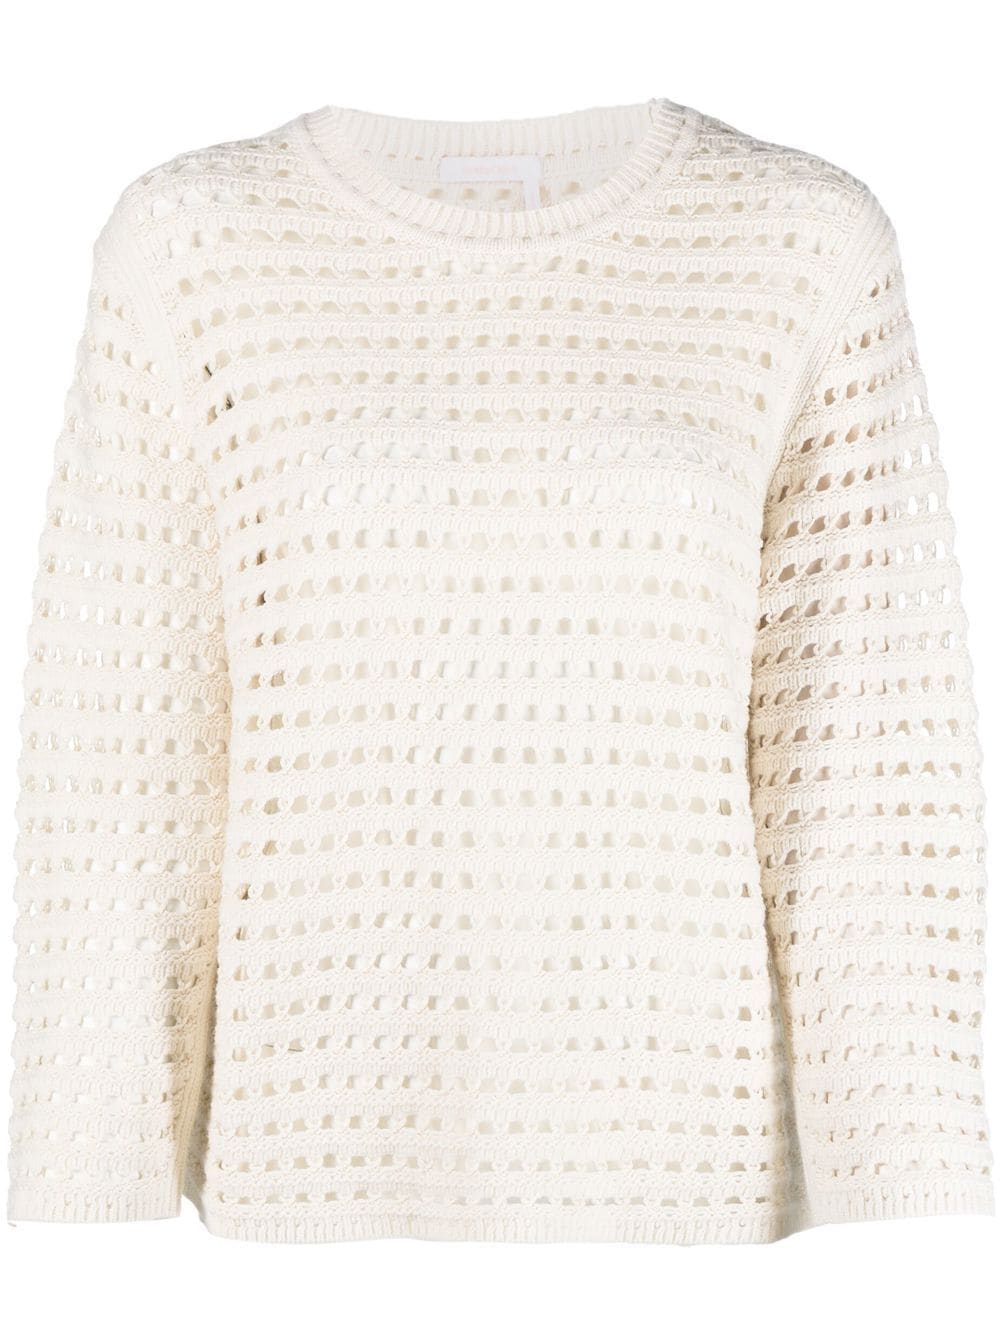 See by Chloé open-knit jumper - White von See by Chloé